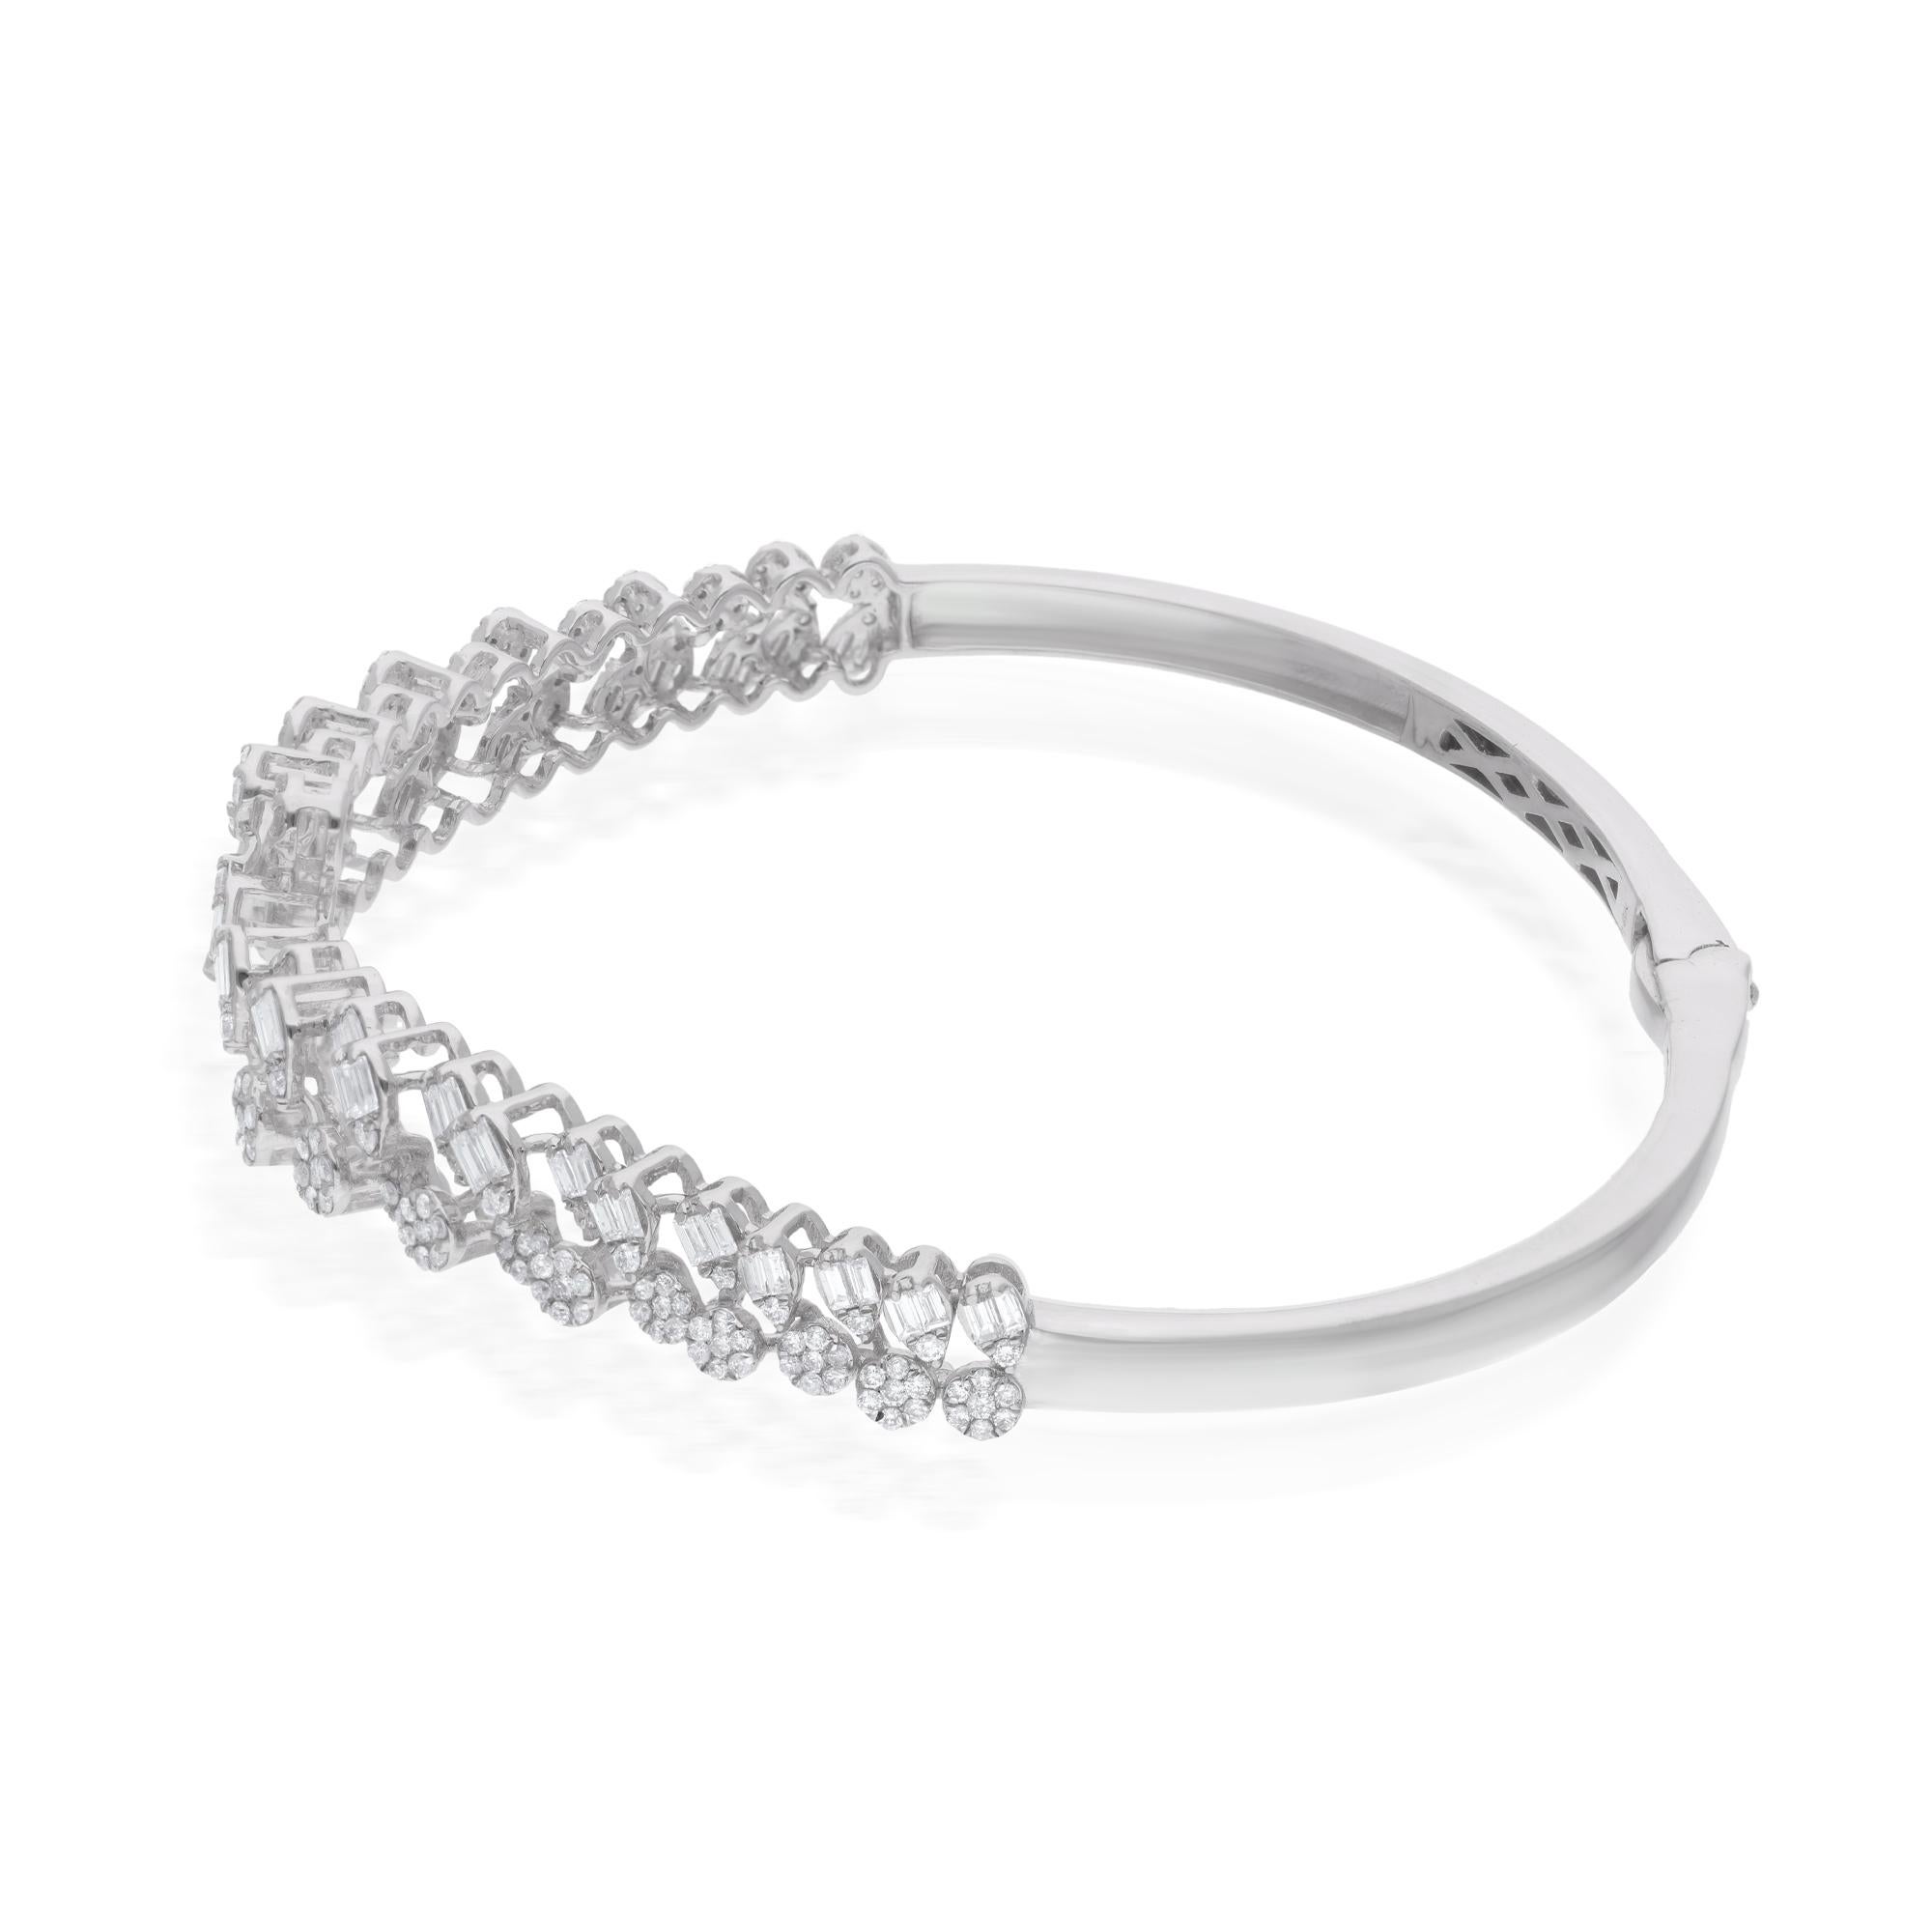 Elegance and sophistication converge in this exquisite Natural Round Baguette Diamond Cuff Bangle Bracelet crafted in lustrous 14 Karat White Gold. A testament to timeless beauty, this bracelet seamlessly blends classic design with modern allure,